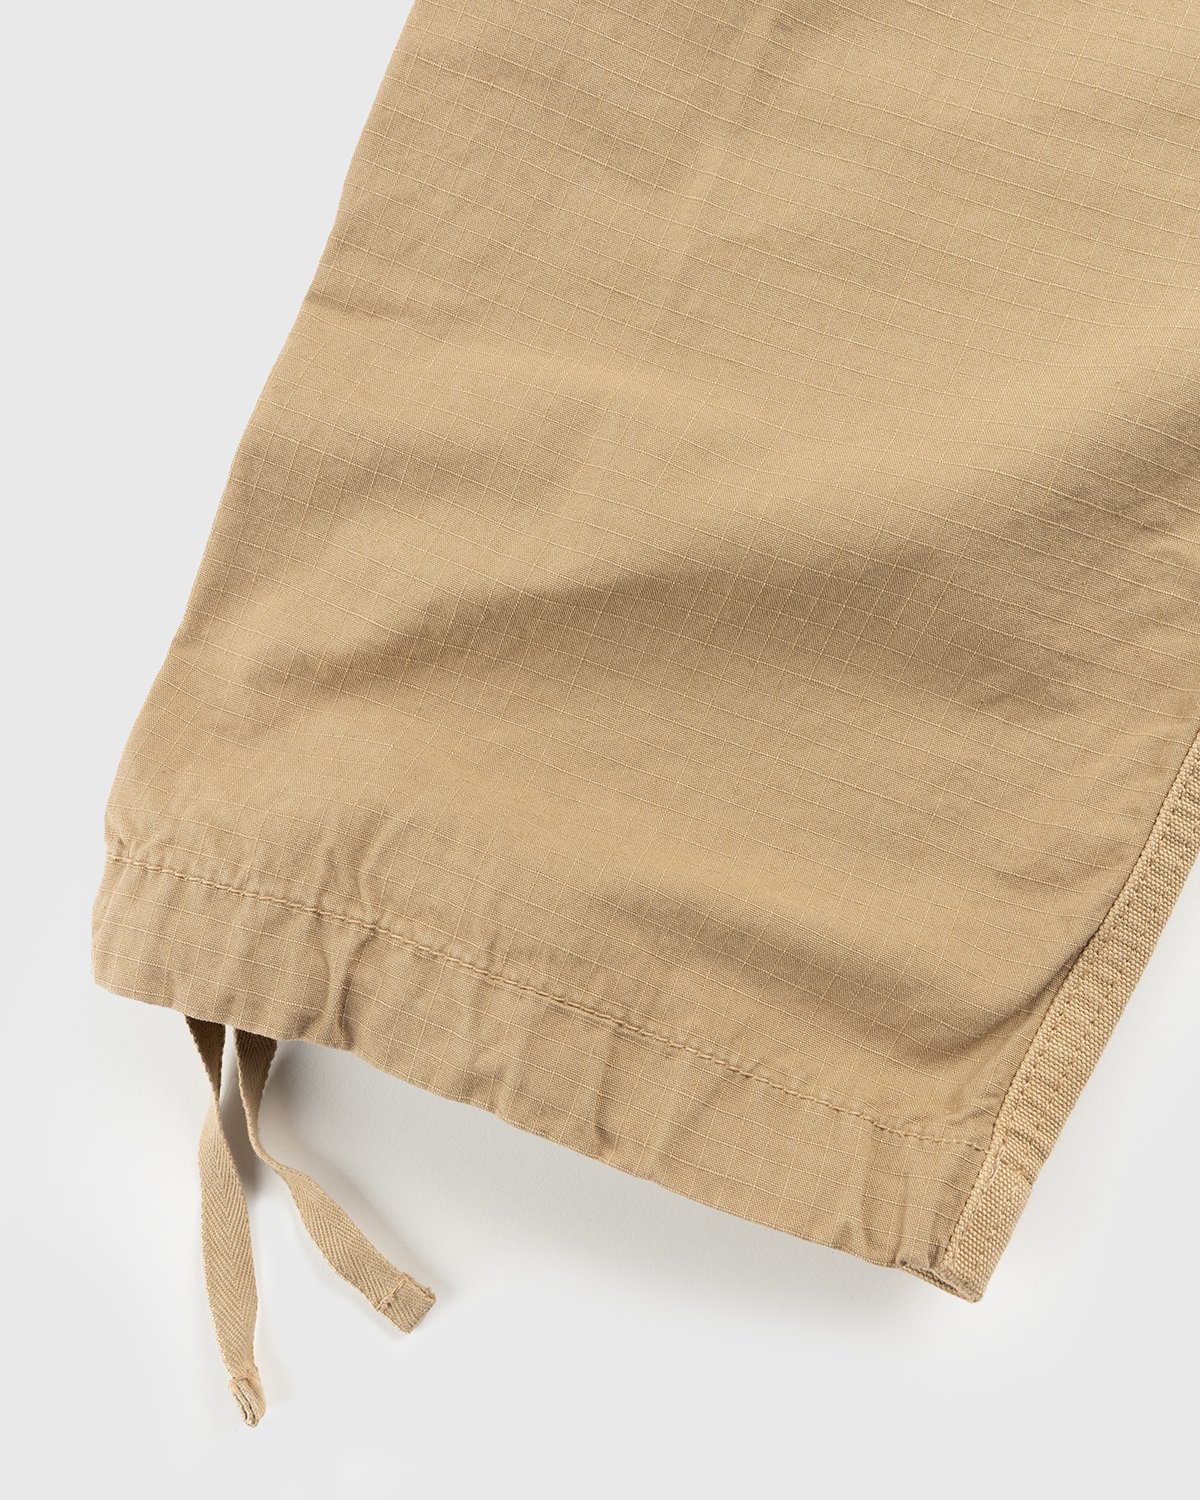 Carhartt WIP - Medley Pant Dusty Hamilton Brown Garment Dyed - Clothing - Brown - Image 5